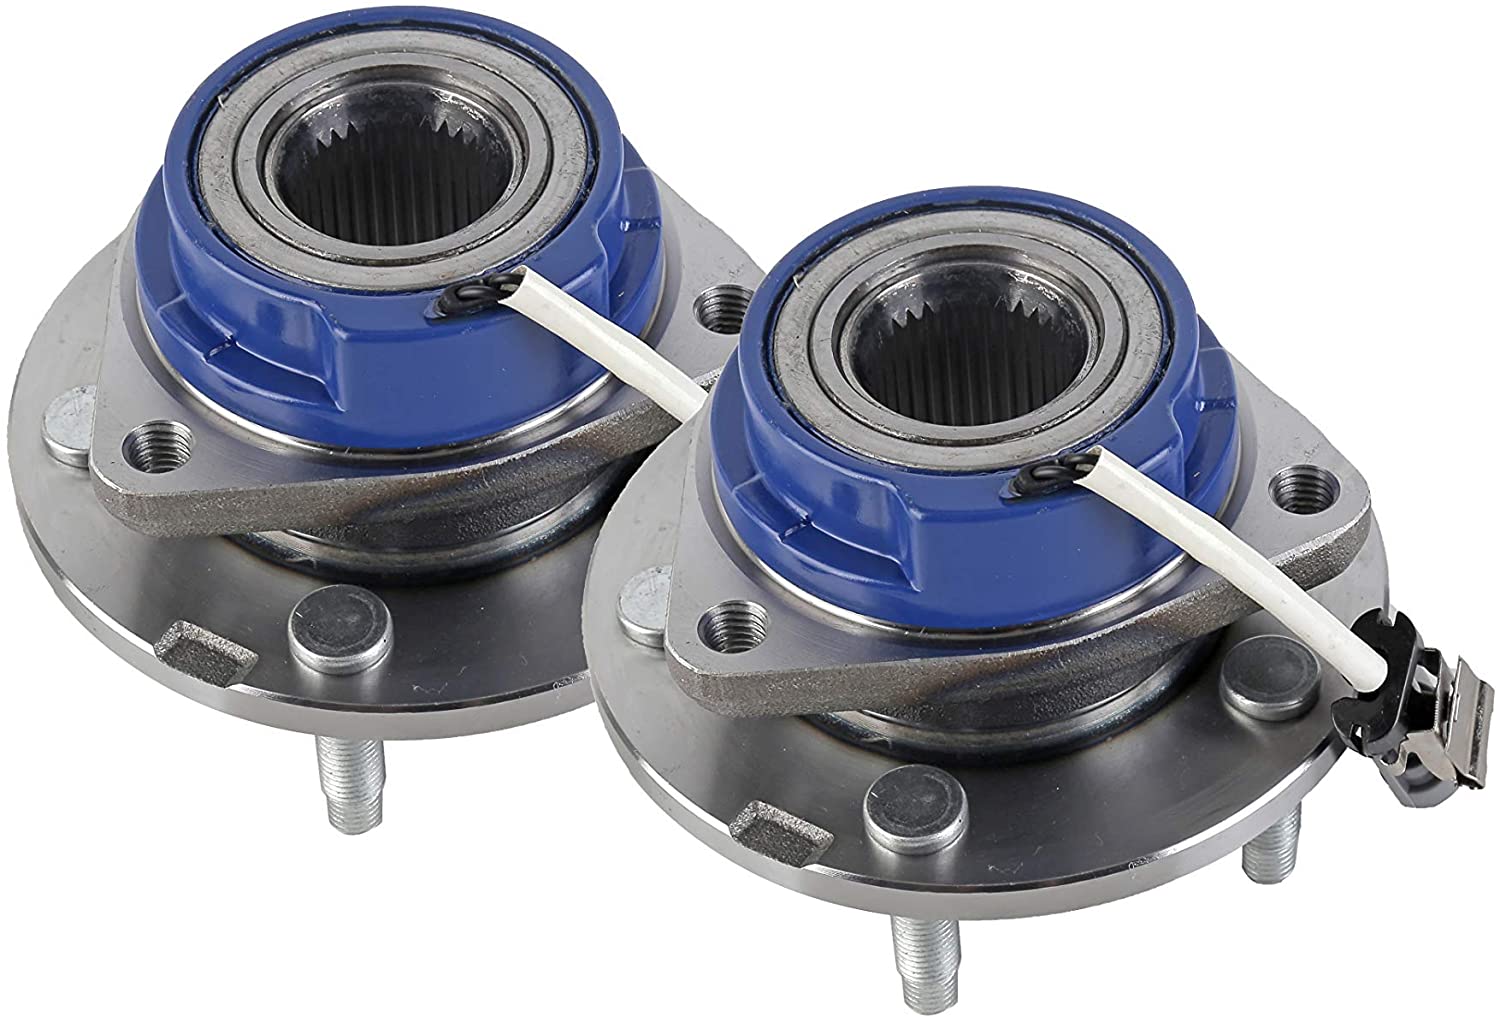 Front Wheel Hub Bearing Assembly Set of 2 - Compatible with Chevy, Buick, Cadillac, Oldsmobile & Pontiac - Impala, Monte Carlo, Century, Aztek, Grand Prix, Replaces 513121, 12429203, 88964168 - ABS